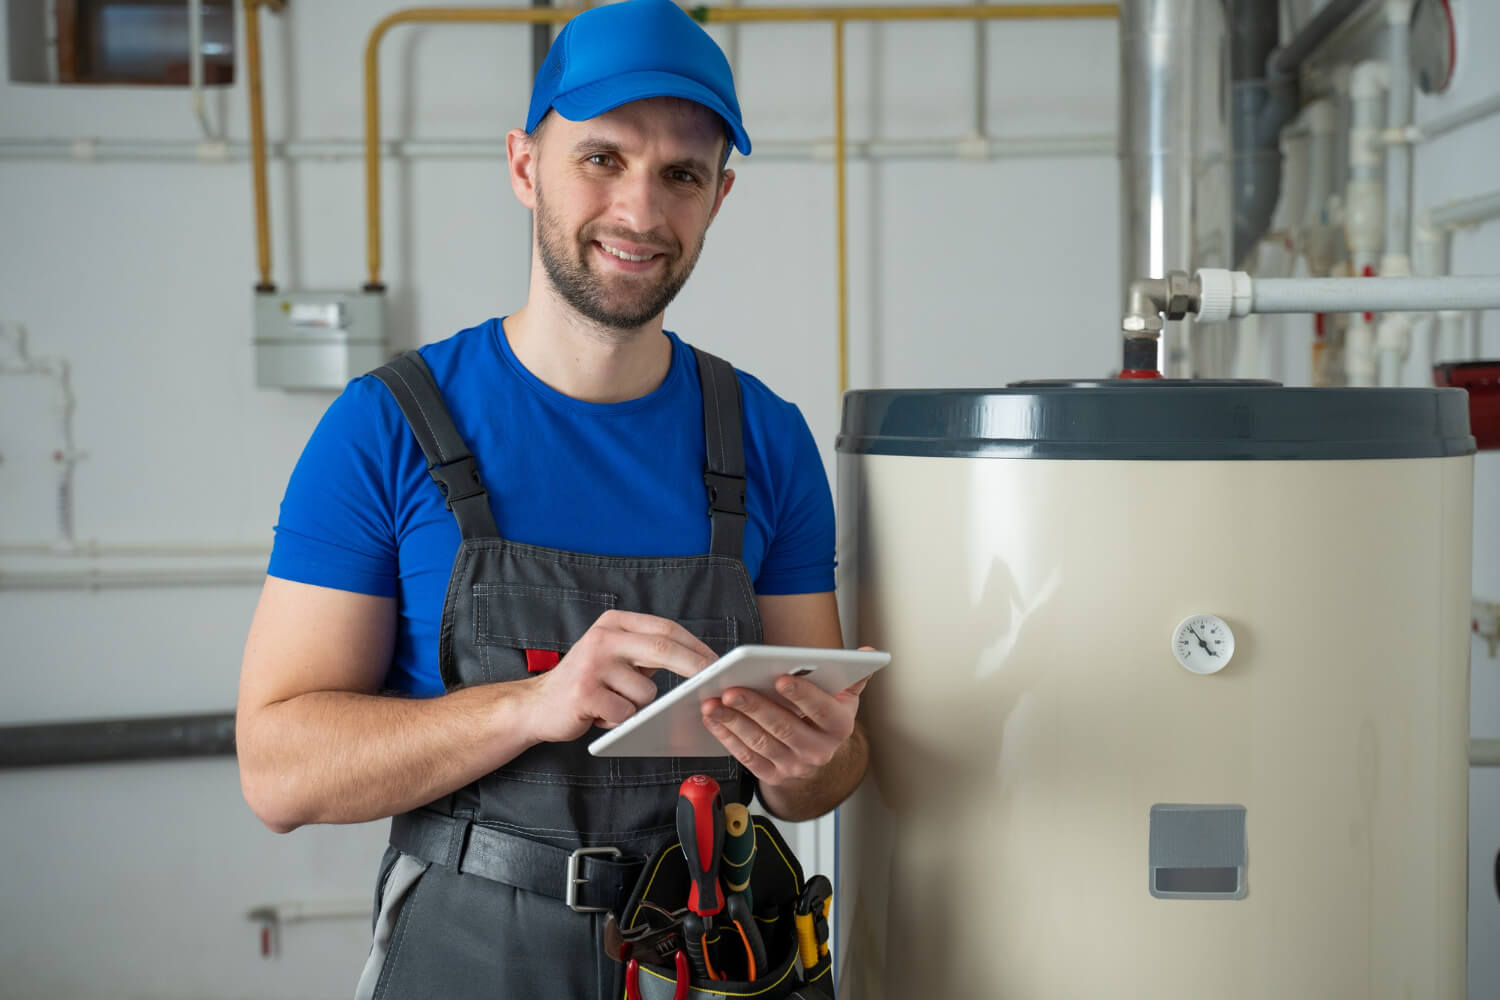 plumber smiling at camera next to boiler while holding textbook and wearing blue uniform and hat